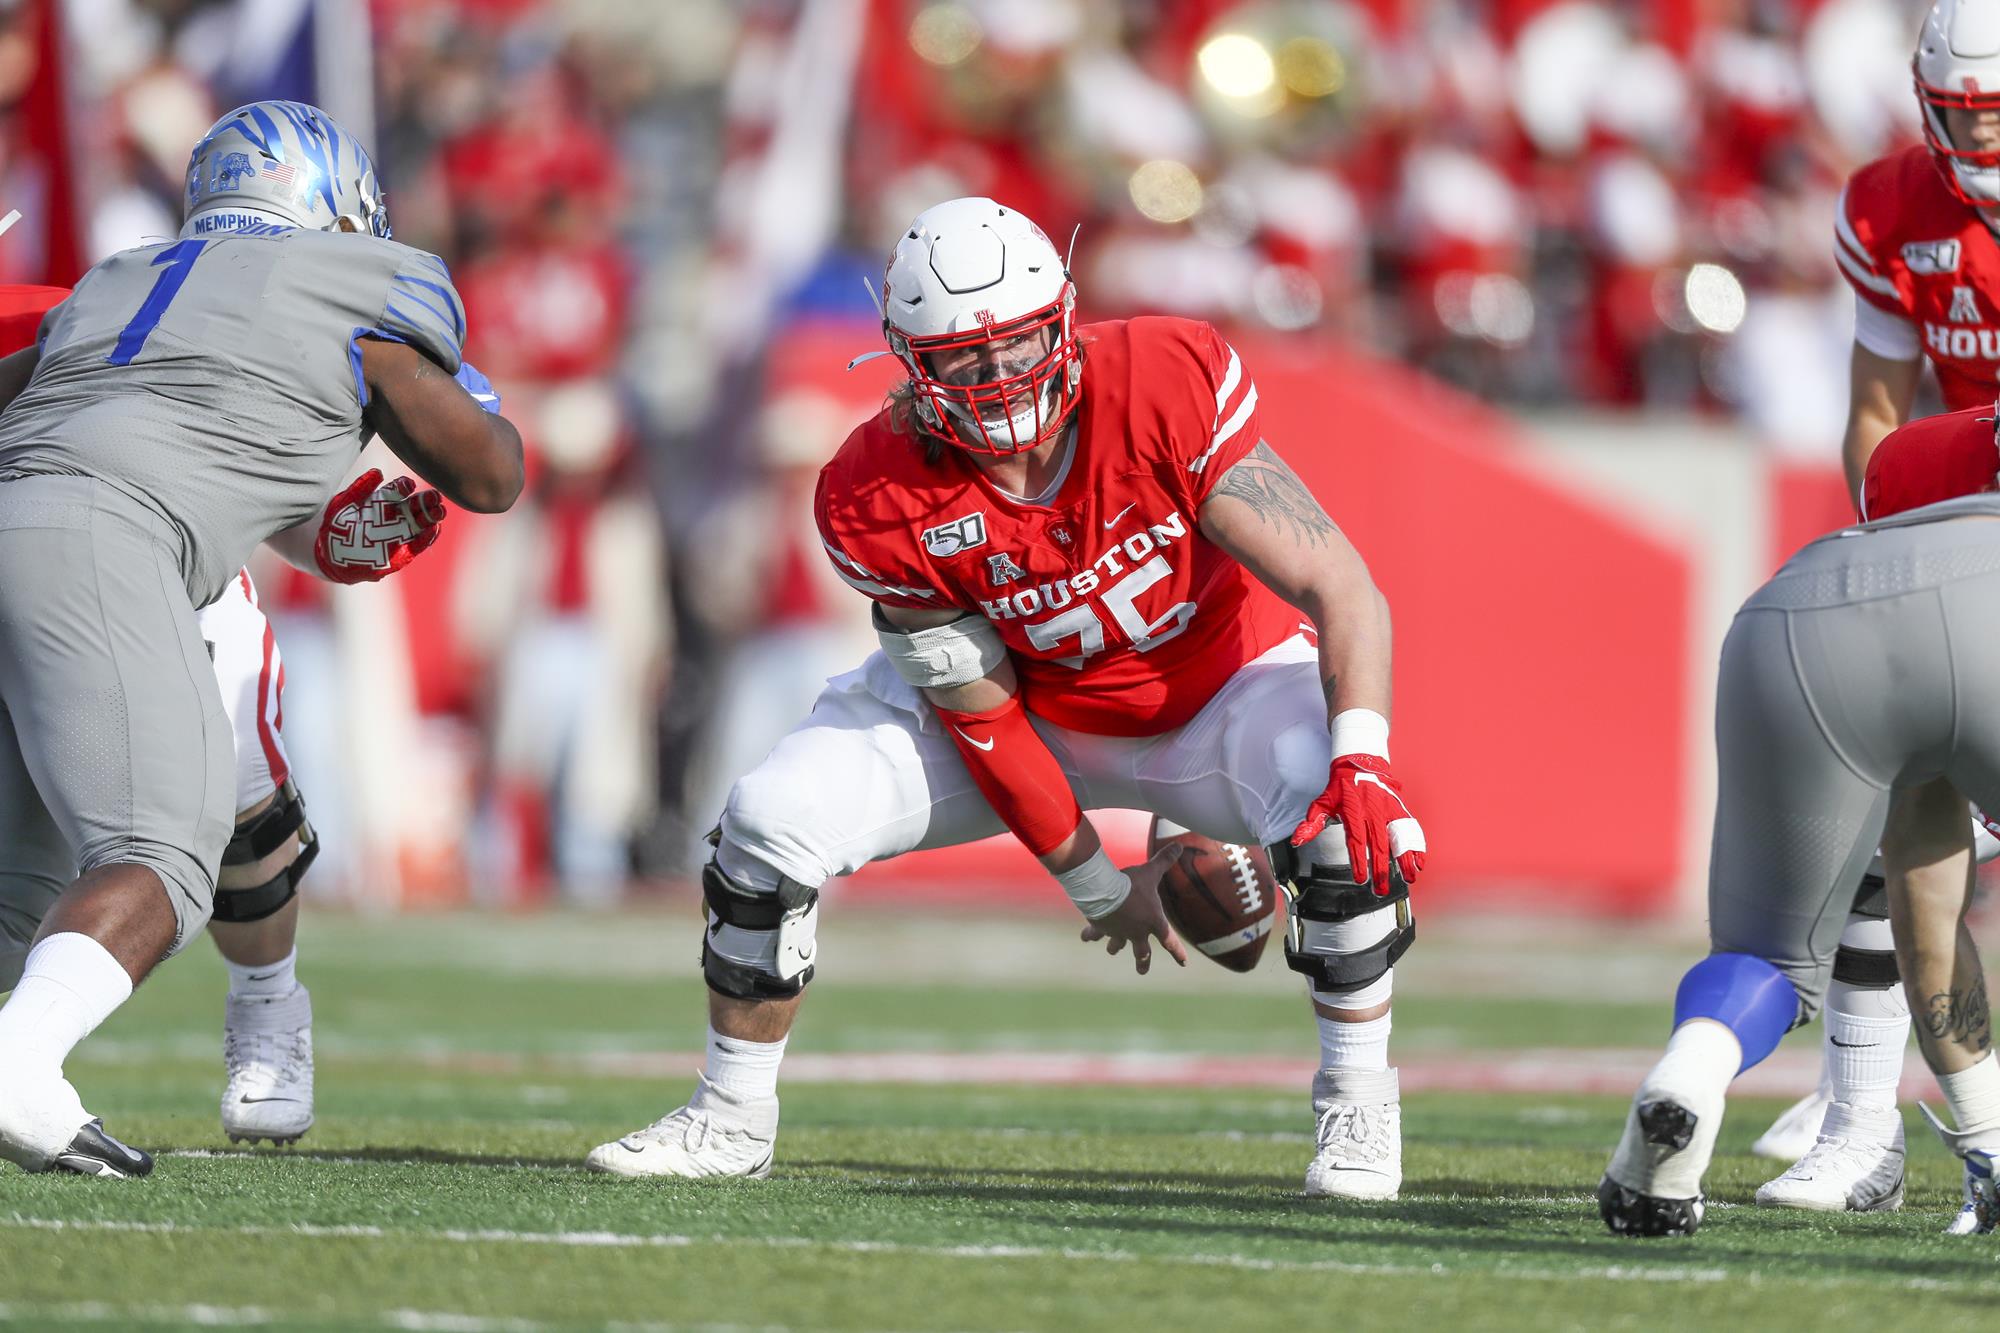 Jack Freeman is a reliable center for the Houston Cougars who showcases great athleticism and mental toughness. He's expected to shine this season as the team makes the move to the Big 12. Hula Bowl scout Scoop Reed breaks down Freeman as an NFL Prospect in his report.